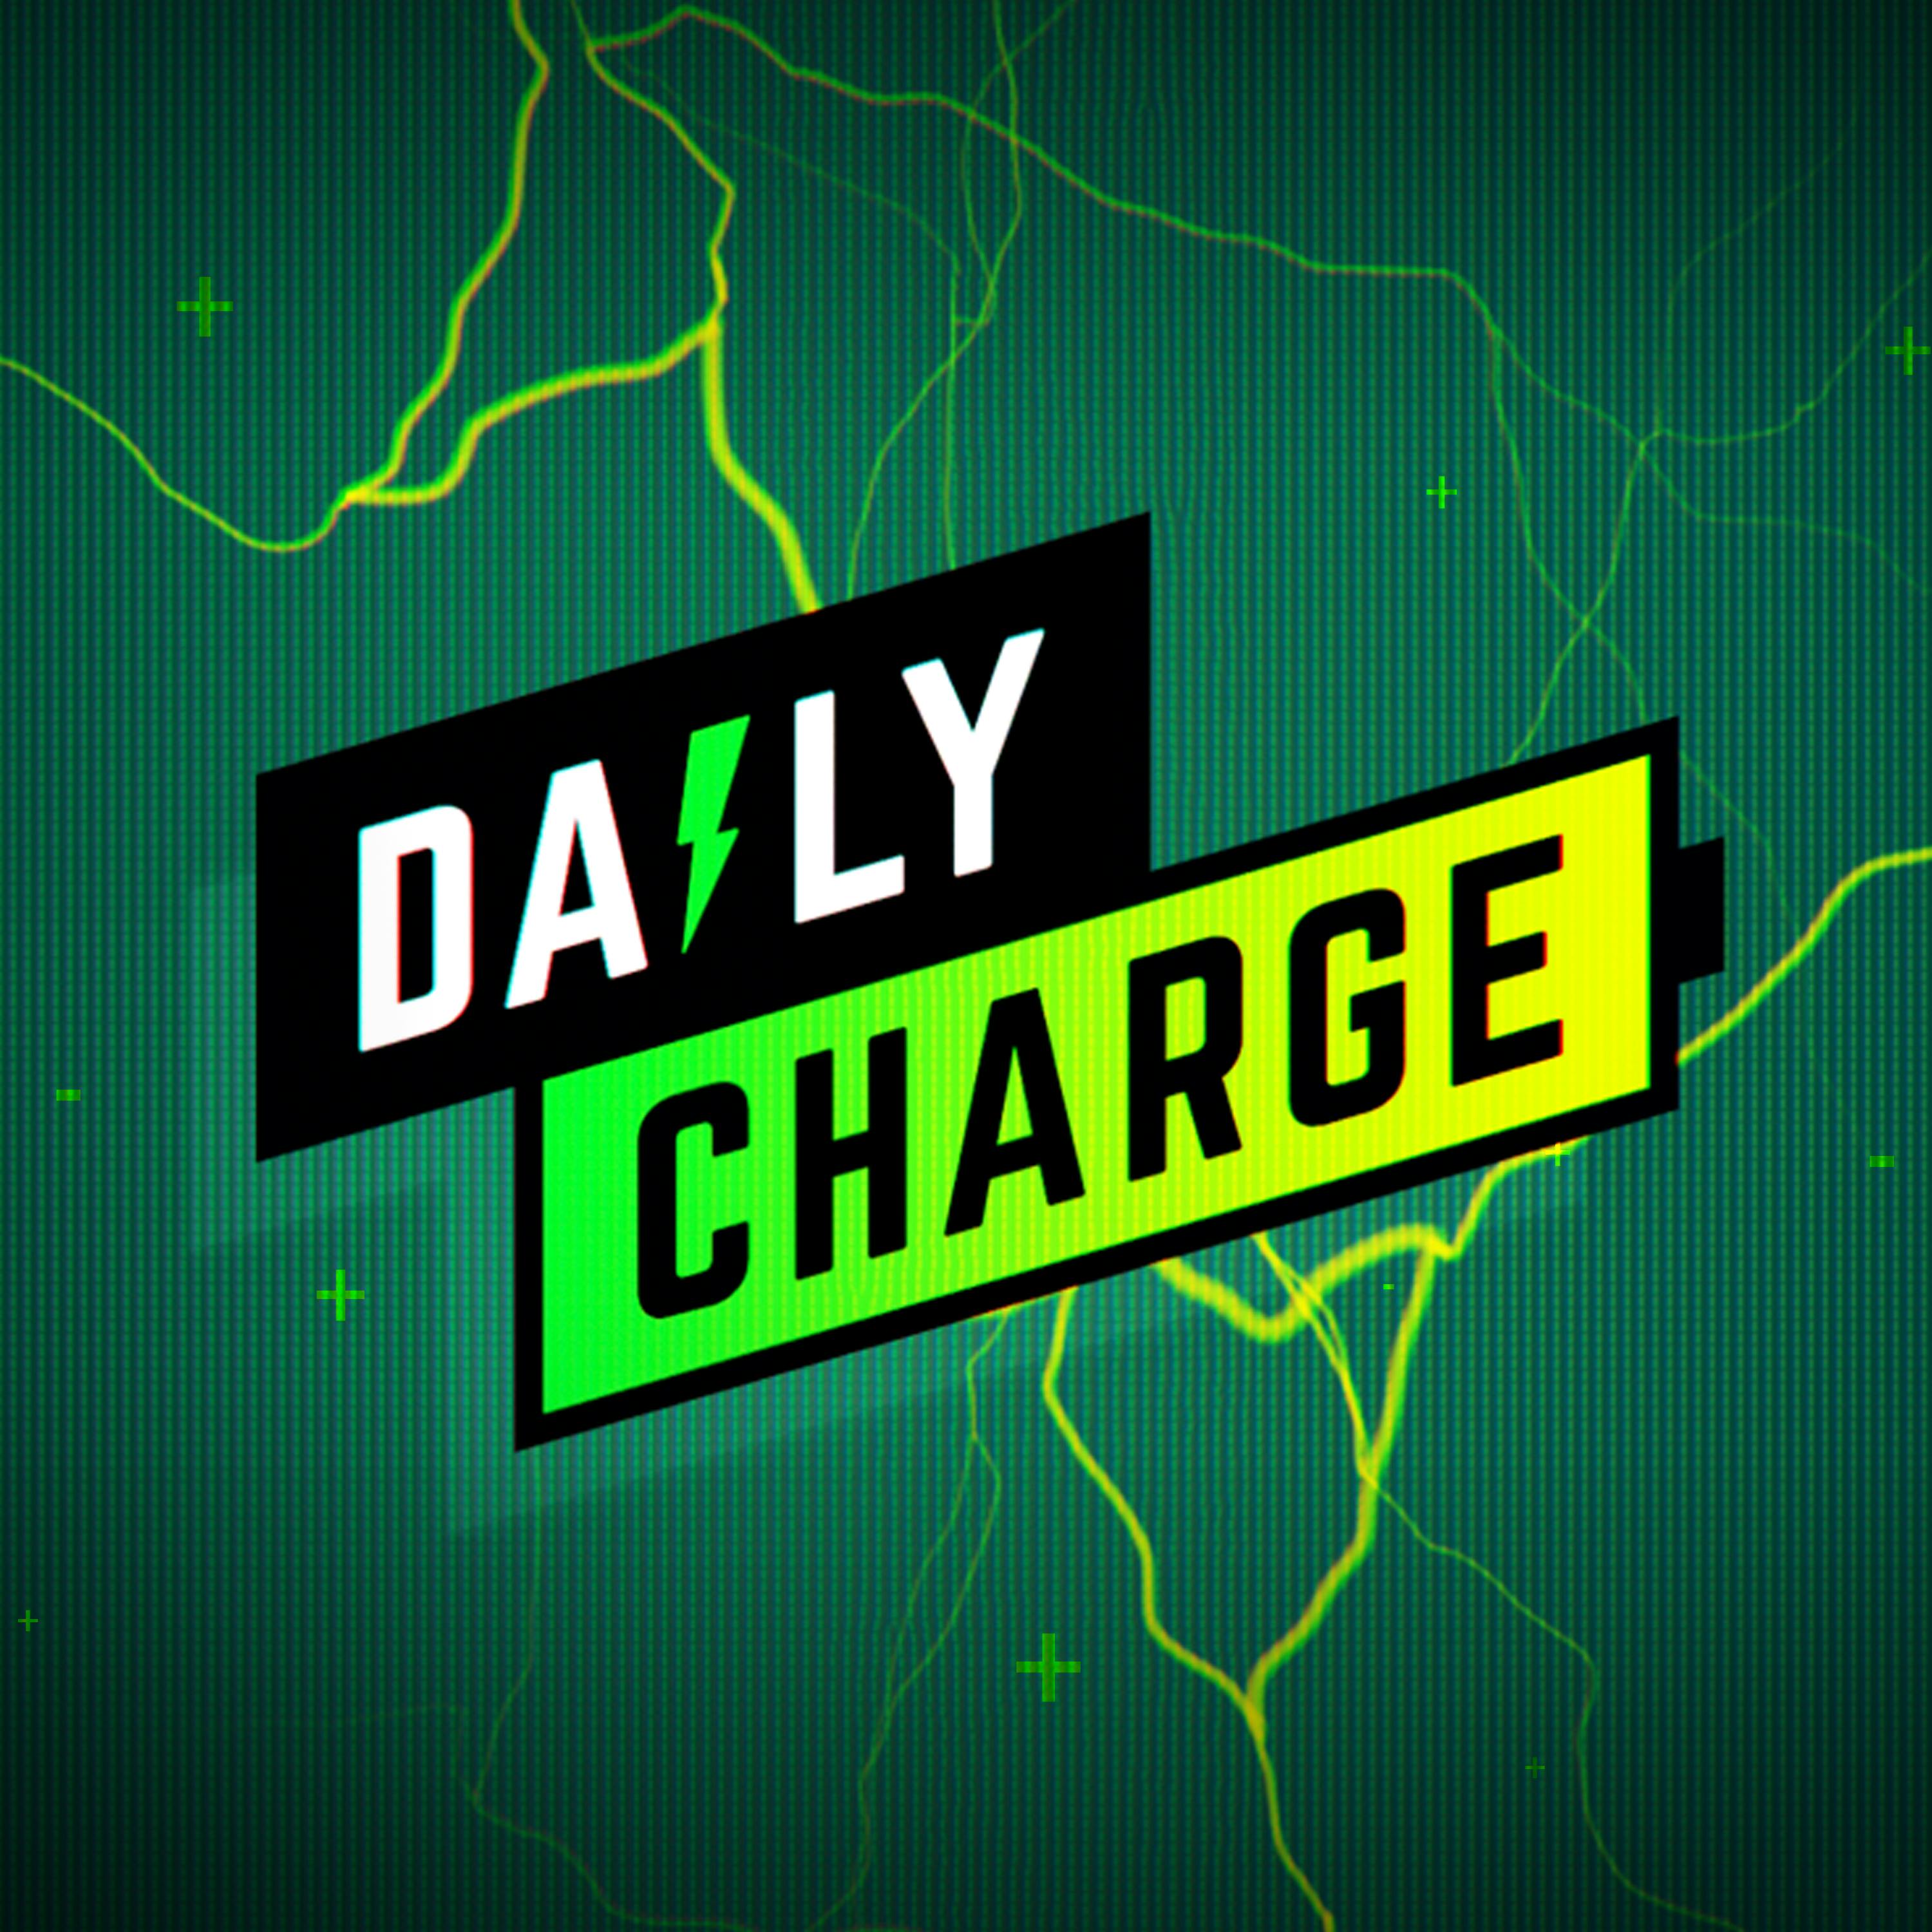 New Apps Give You an Advance On Your Paycheck, But At a Cost (The Daily Charge, 6/13/2022)